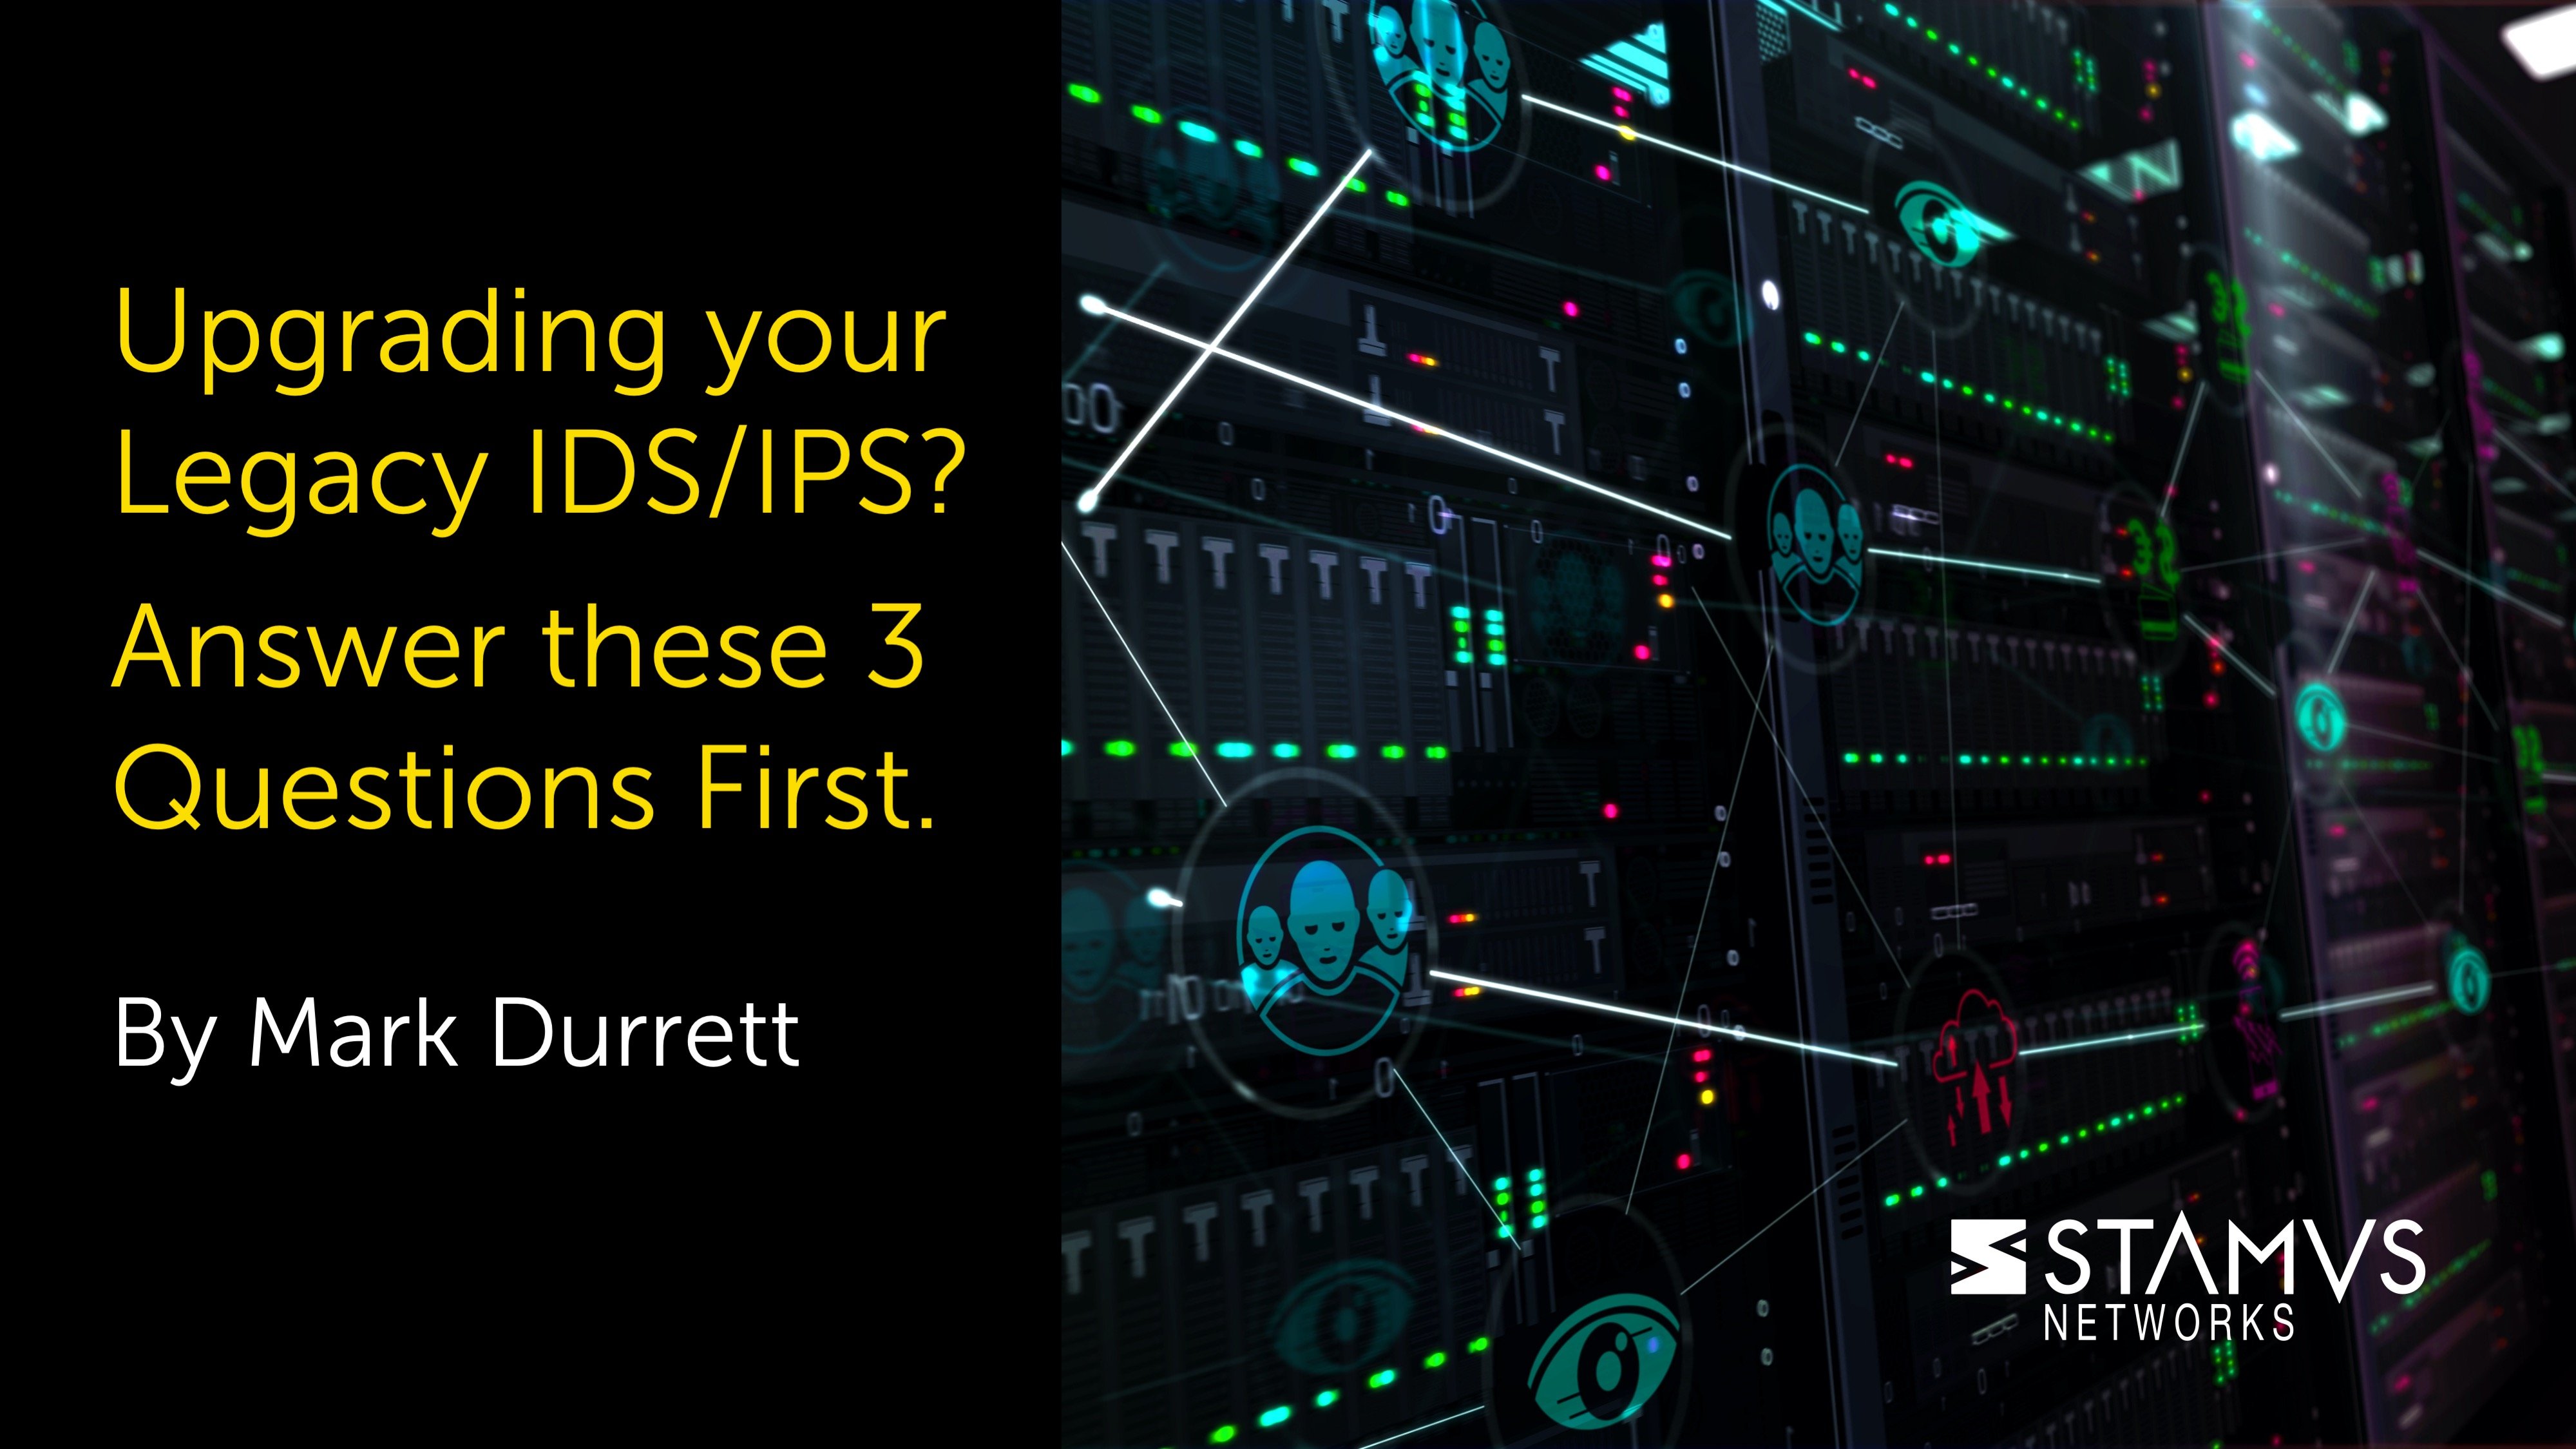 IMAGE: Upgrading your IDS/IPS? Answer these 3 Key Questions First.